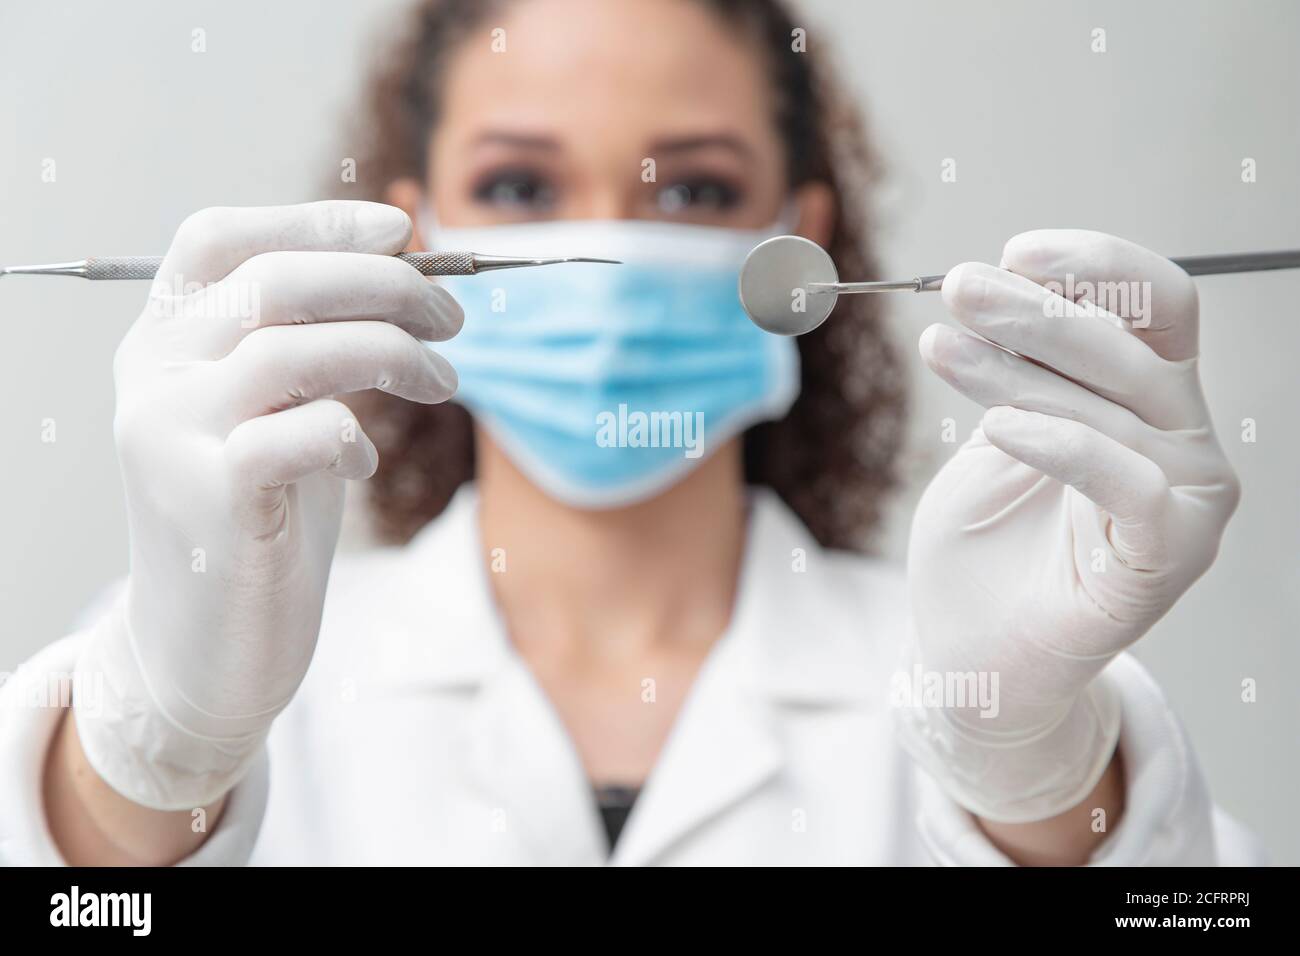 dentist face with mask, gown and cap holding medical instruments, close up Stock Photo